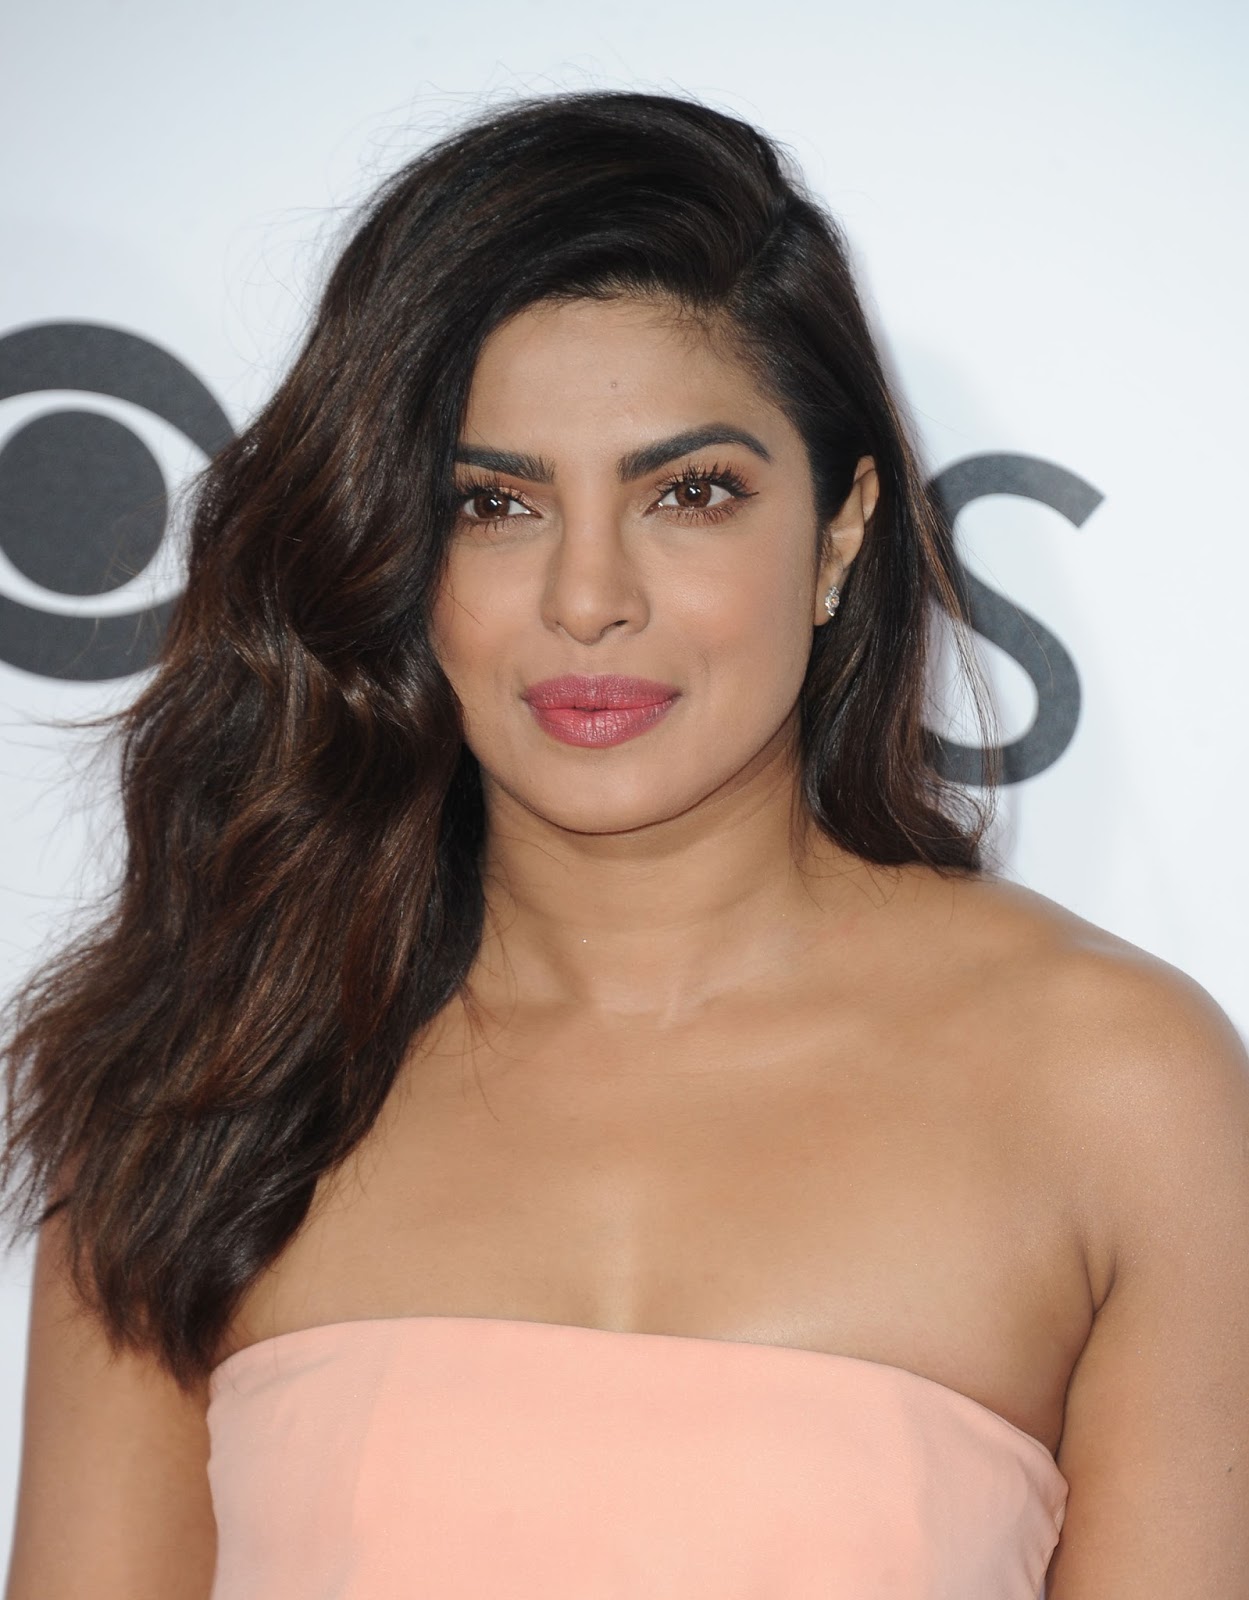 Priyanka Chopra Looks Hot As She Attends The People's Choice Awards 2017 at Microsoft Theater in Los Angeles